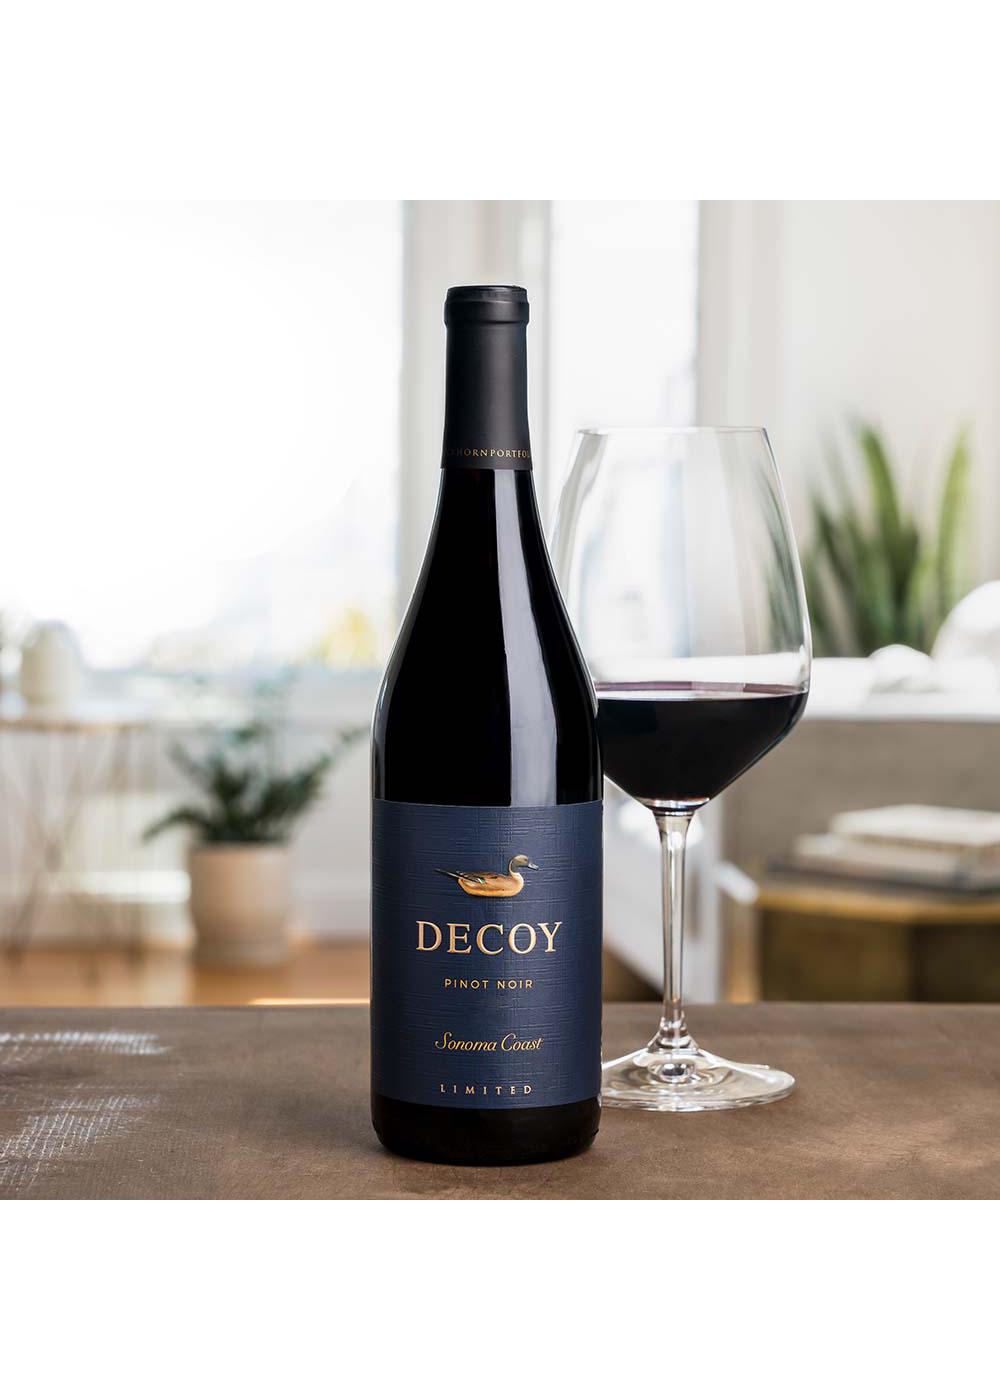 Decoy Limited Pinot Noir Red Wine; image 2 of 2